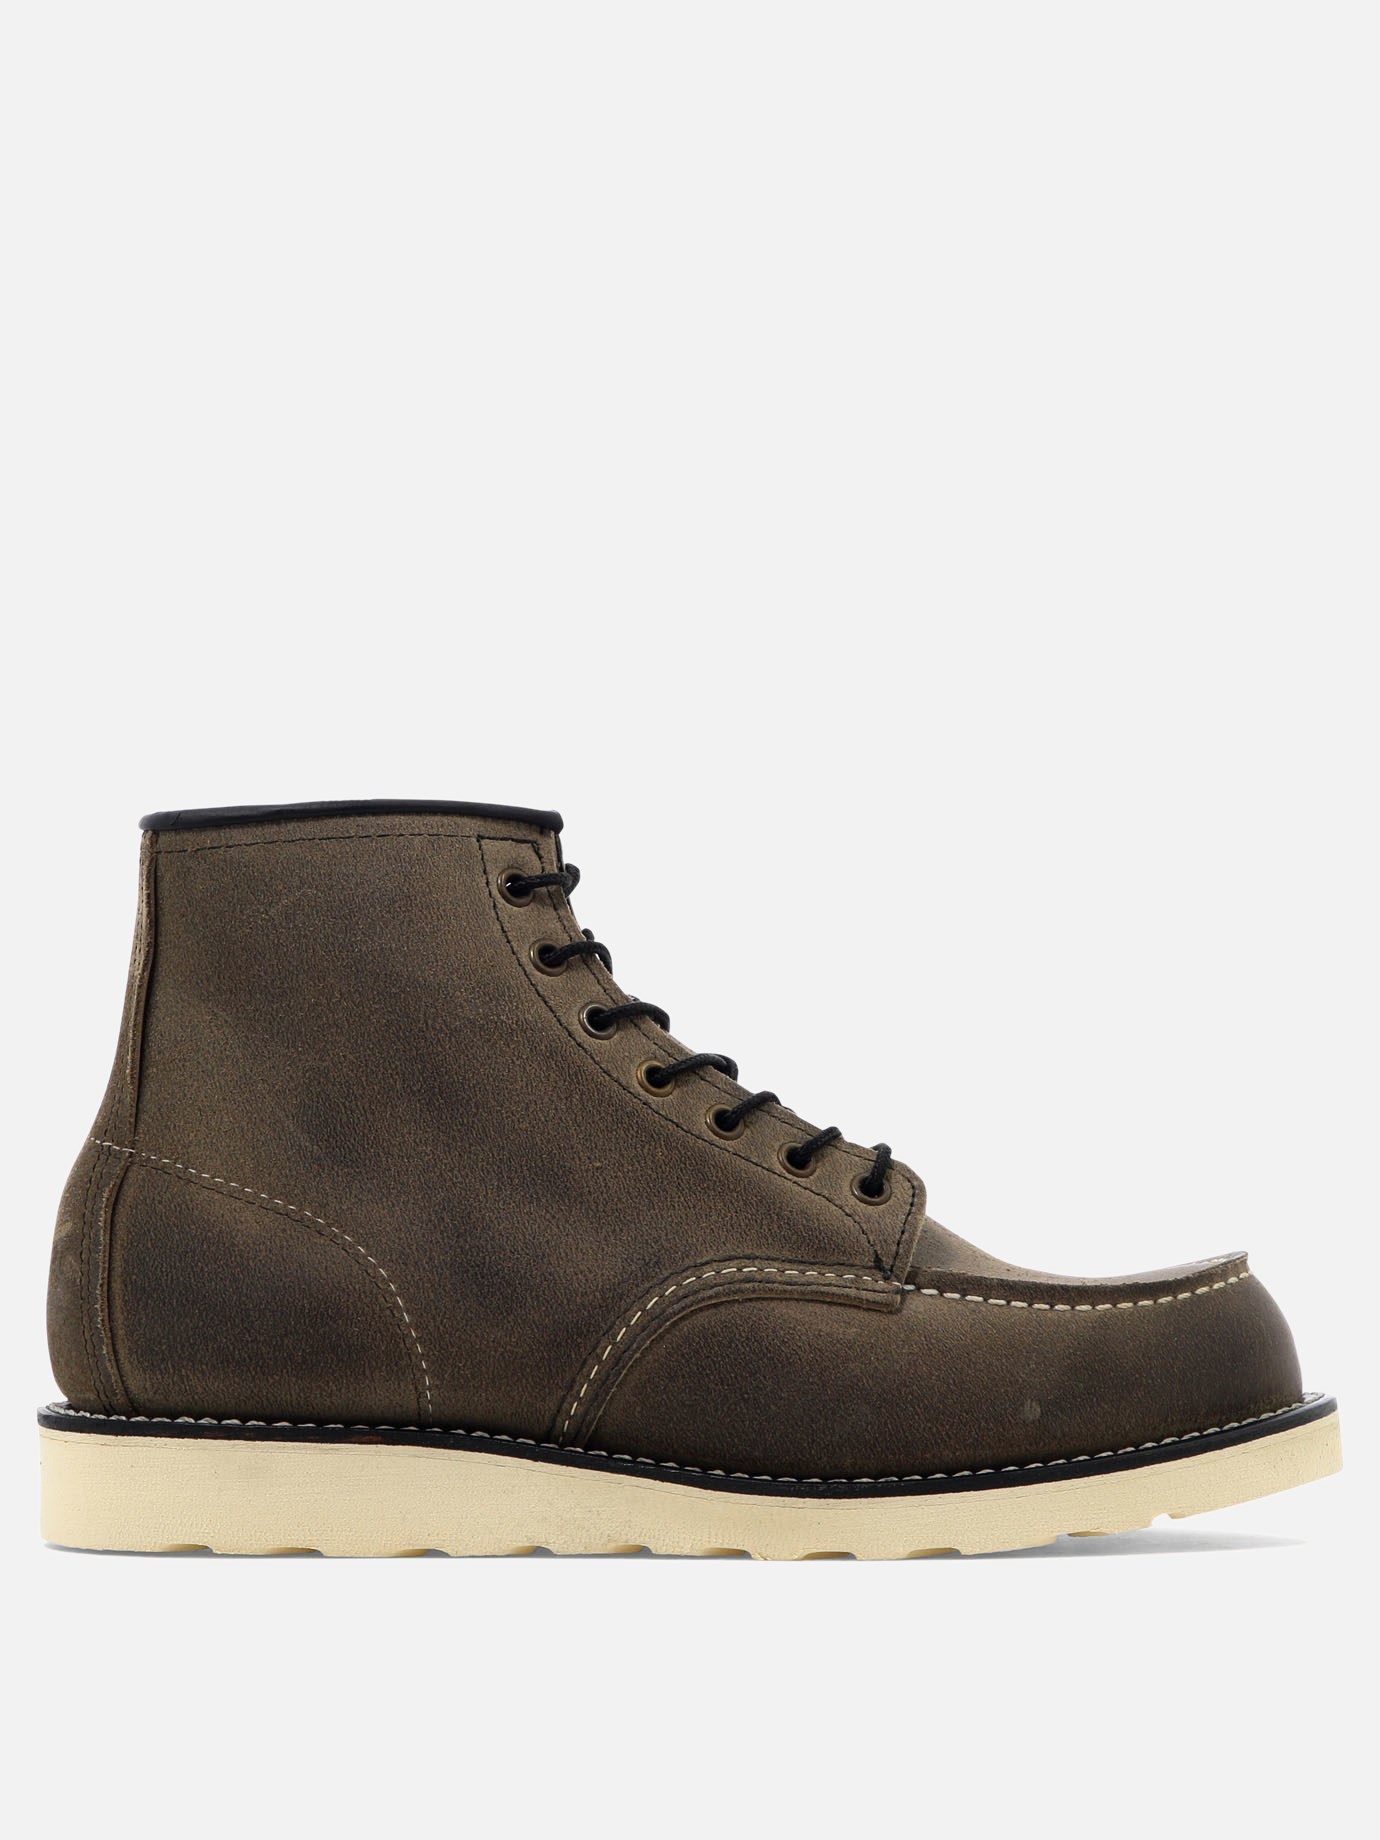 Stivaletti  Classic Moc Toe by Red Wing Shoes - 5